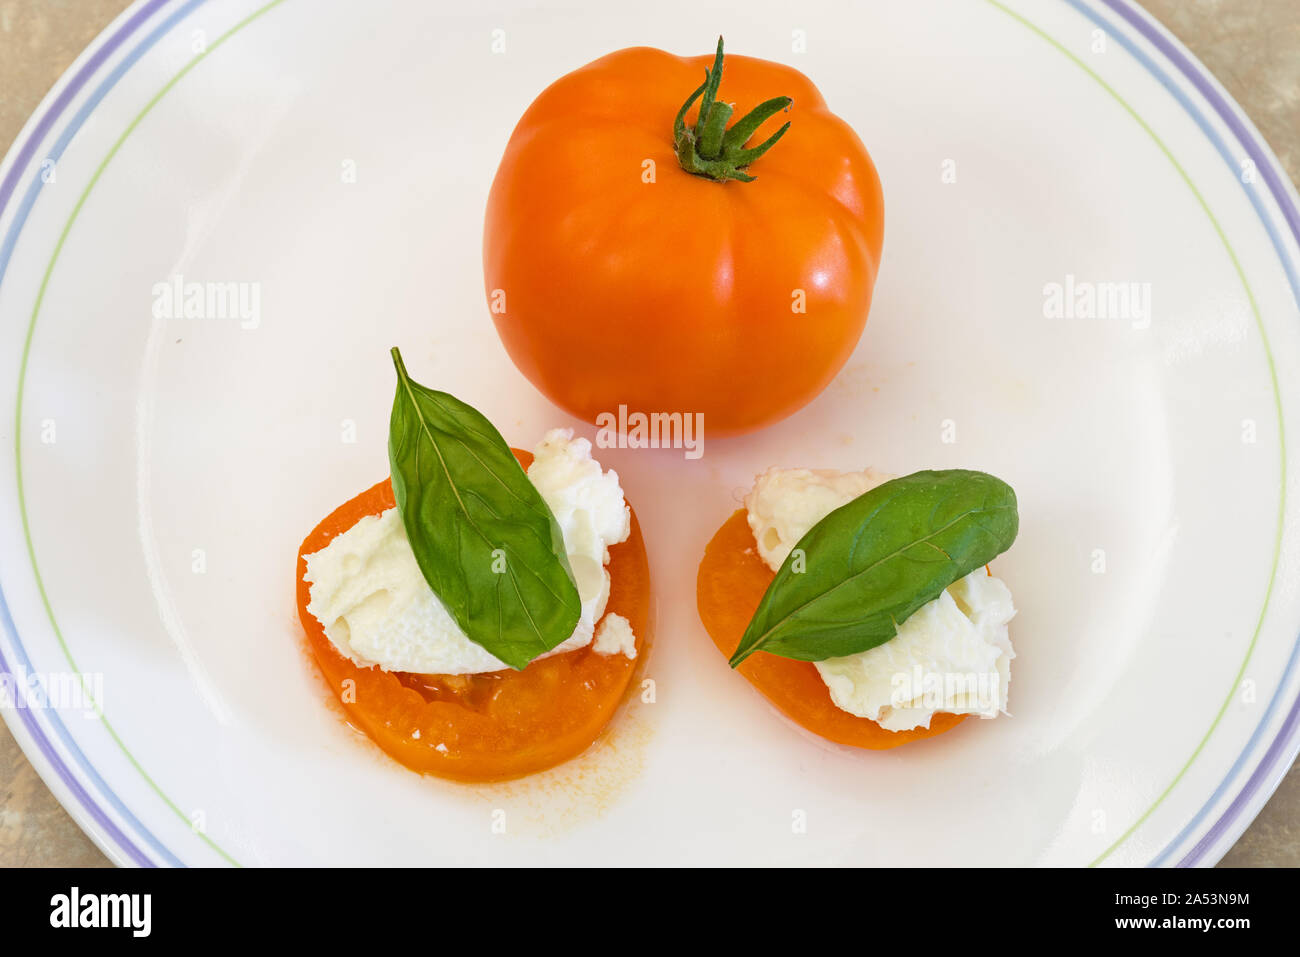 fresh home grown garden tomato cheese and basil snack on a plate with a whole tomato Stock Photo